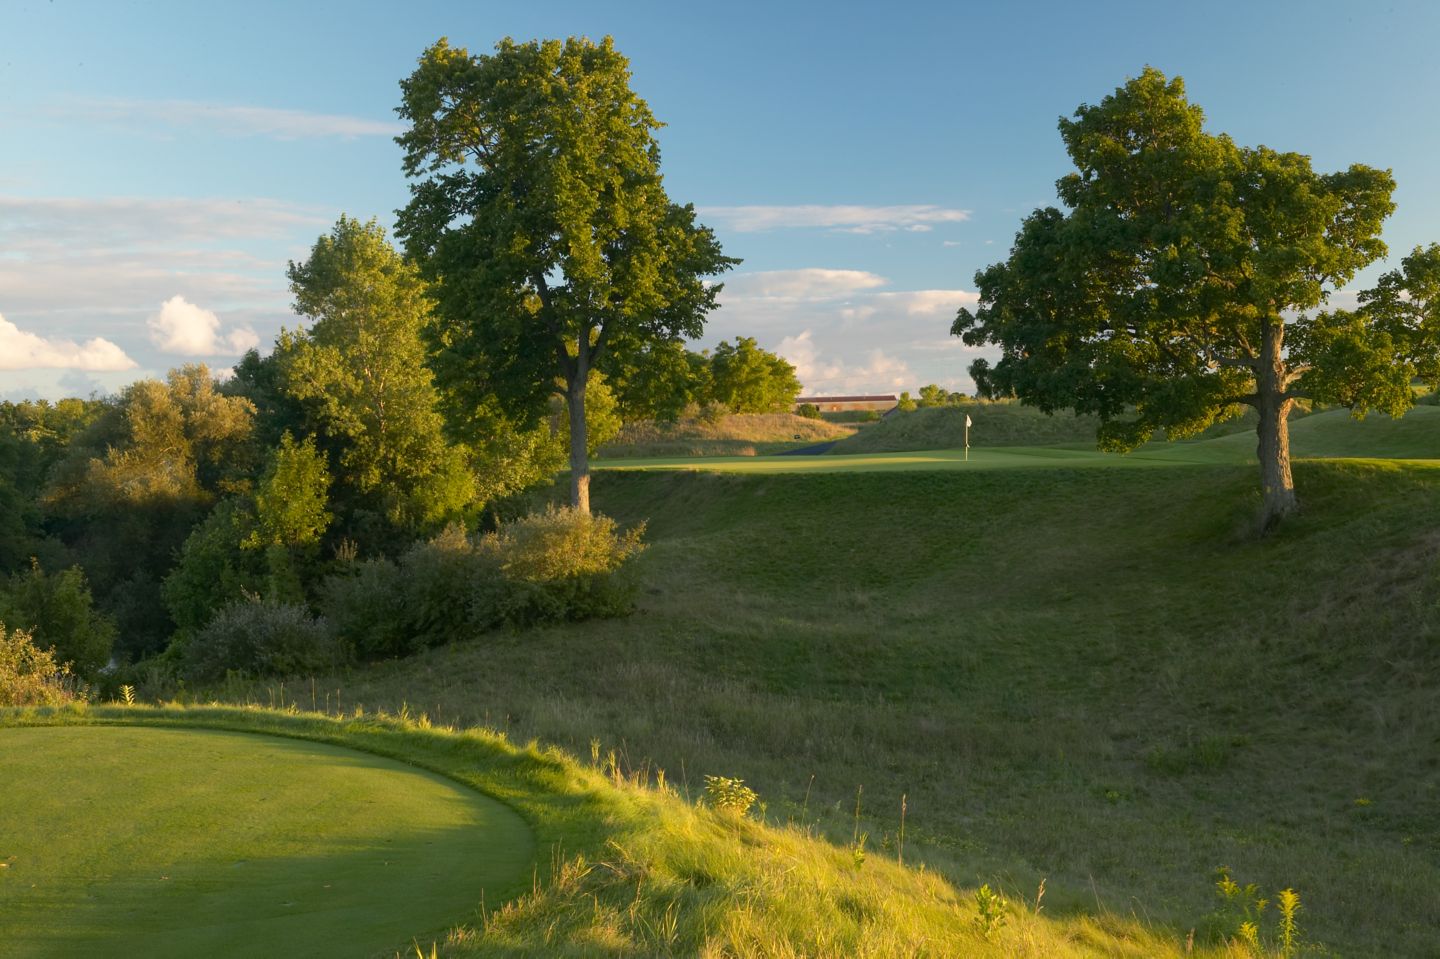 Hole 17 on the Meadow Valleys course with maple trees on each side of the green.